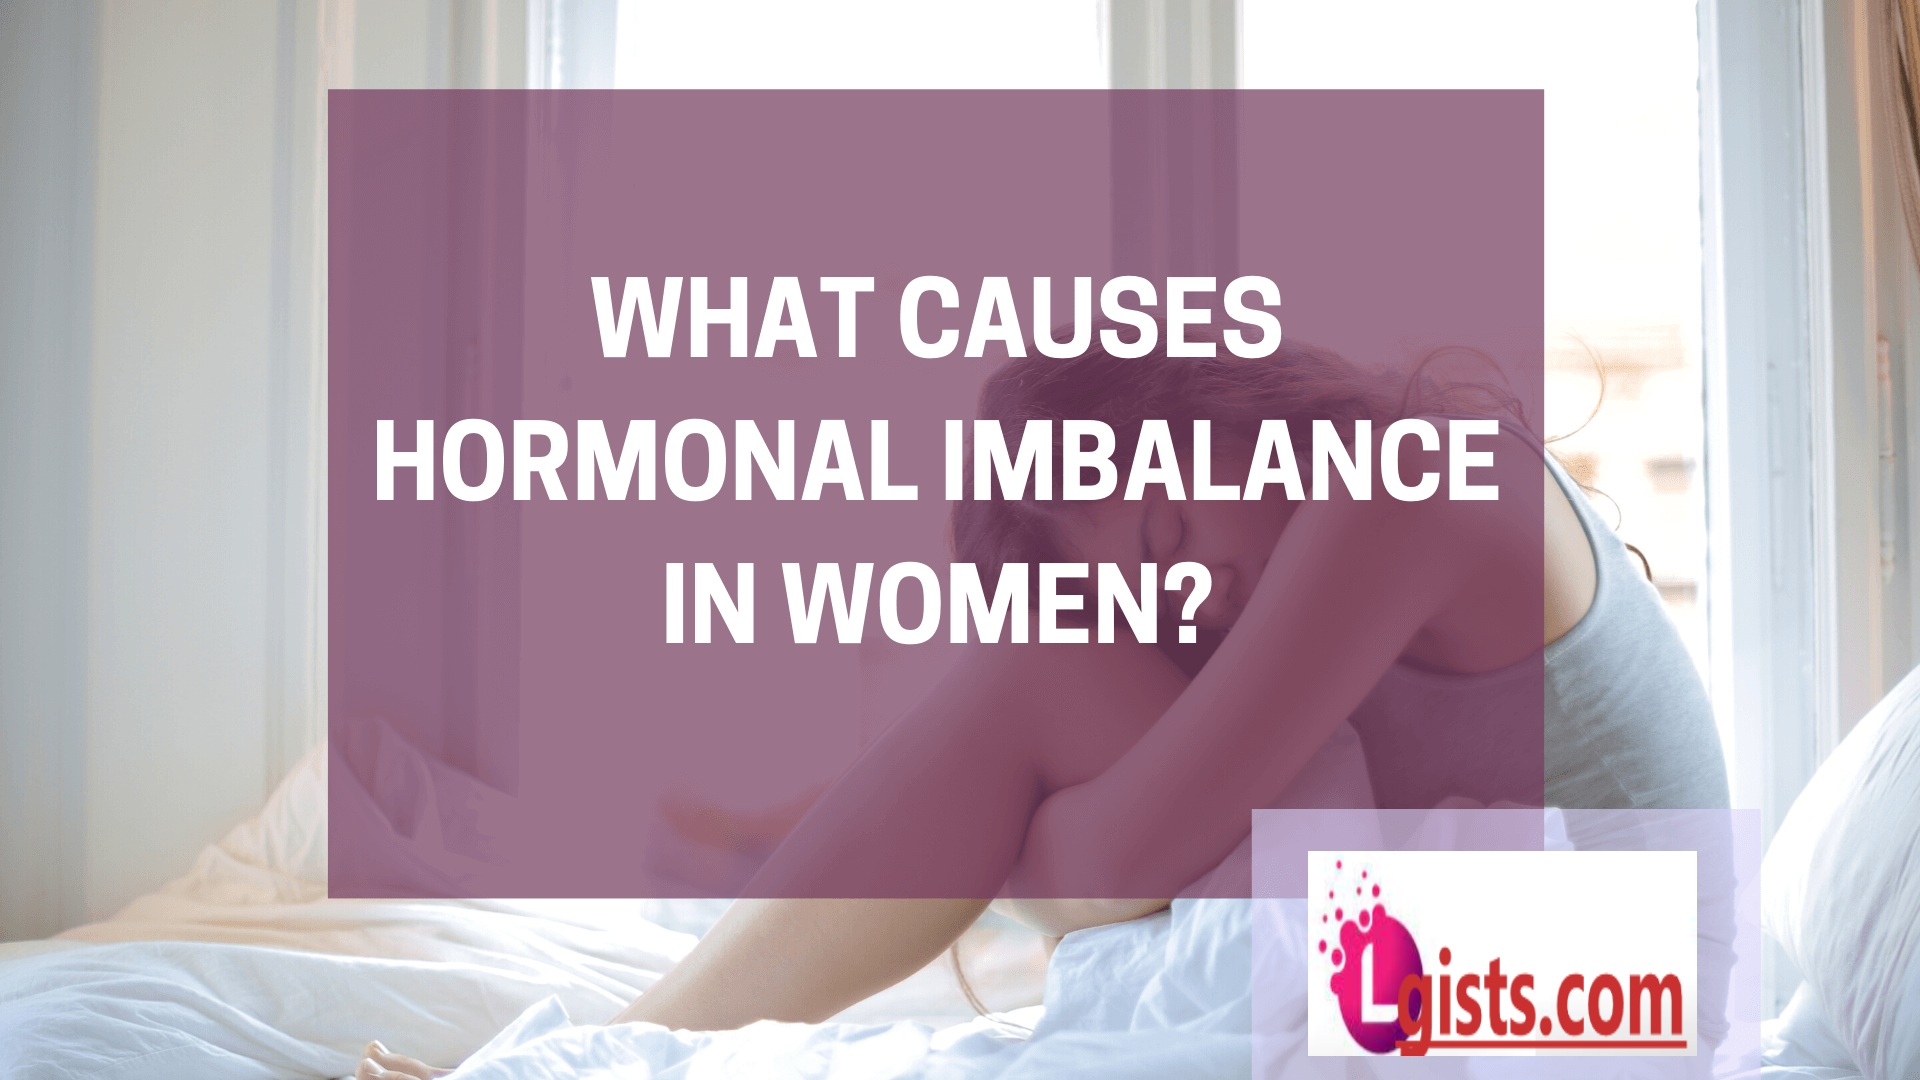 Hormonal Imbalance: What It Is and How to Fix It